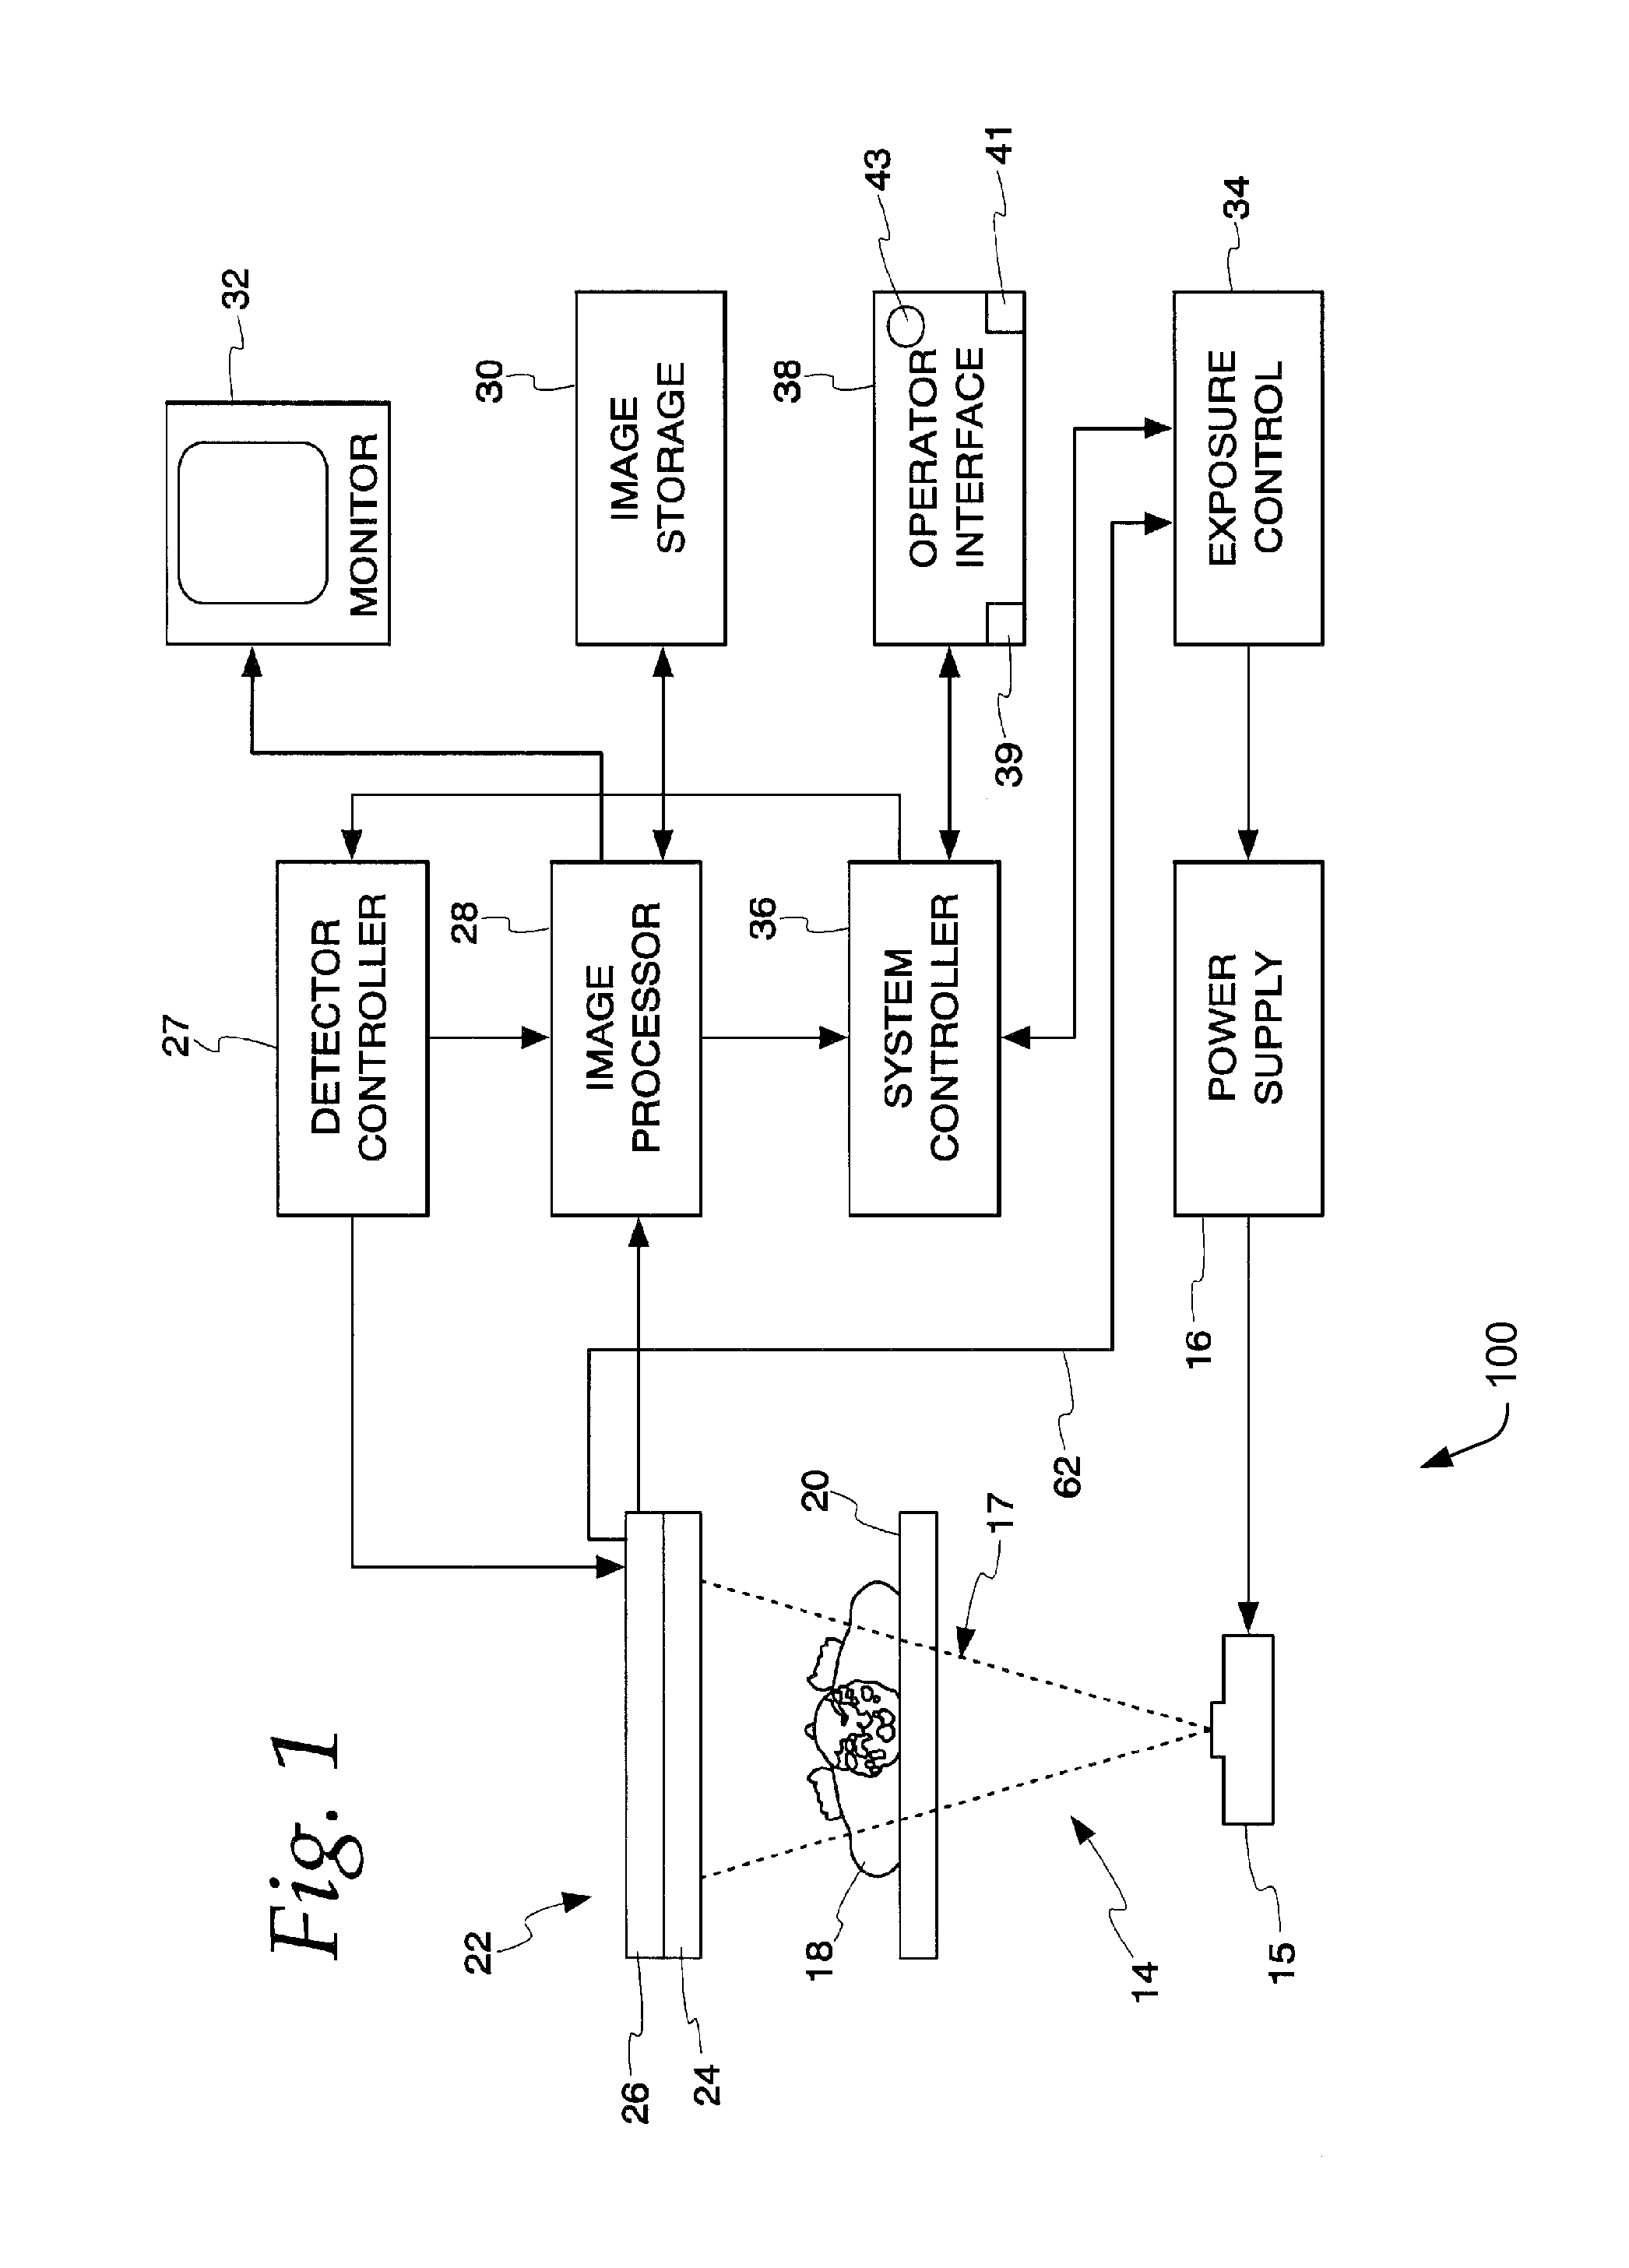 Systems and methods for interactive image registration